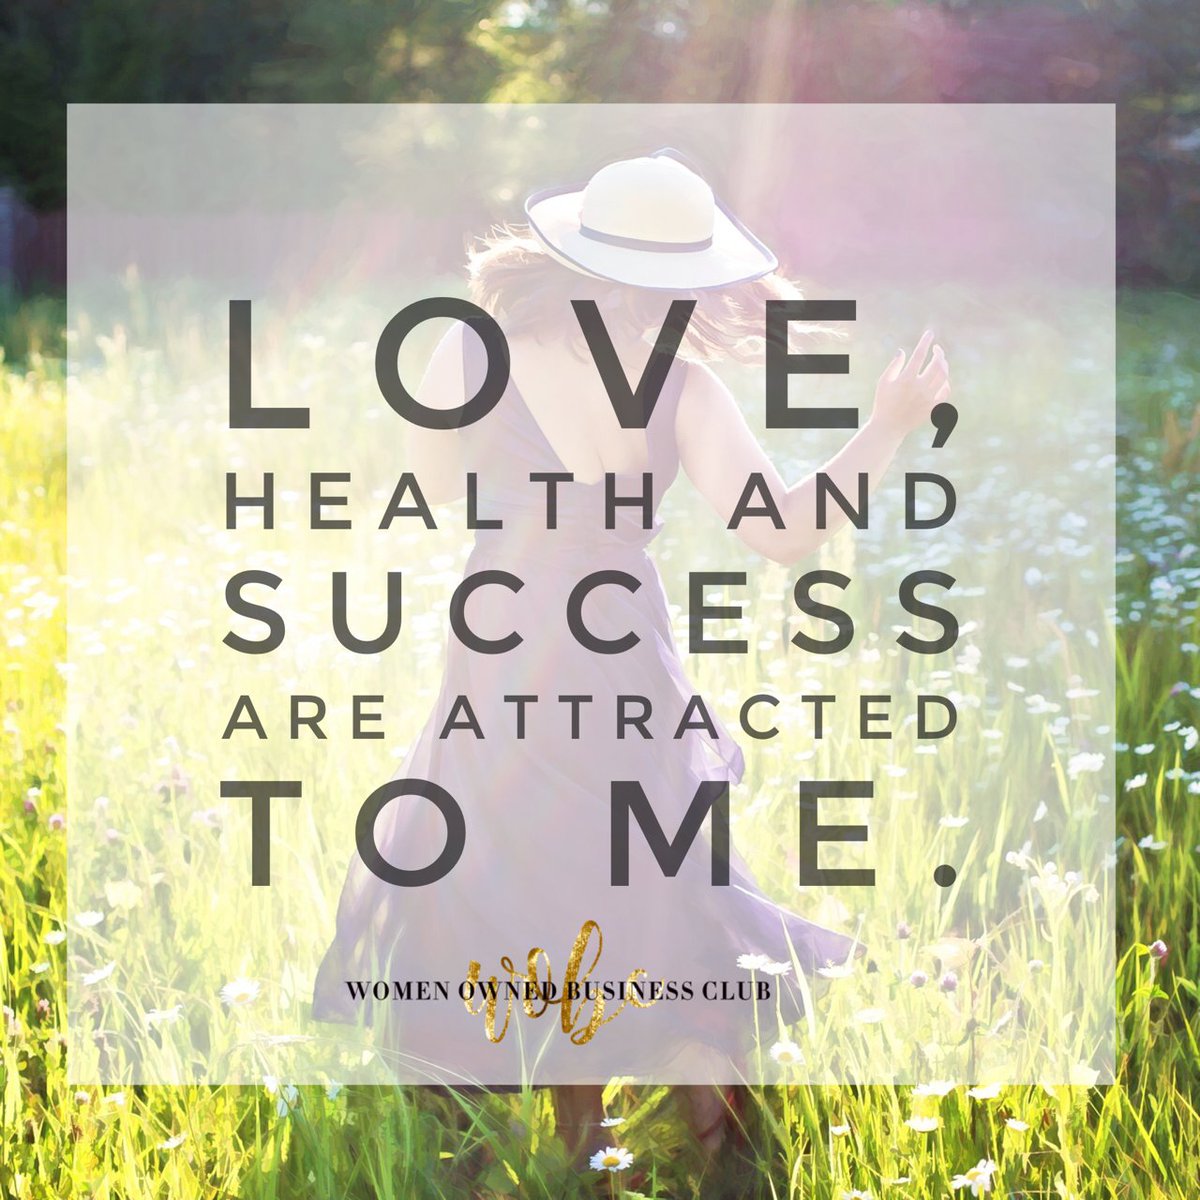 Love, health and success are attracted to me. #womaninbusiness #love #health #success #femaleentrepreneur #ilovewobc